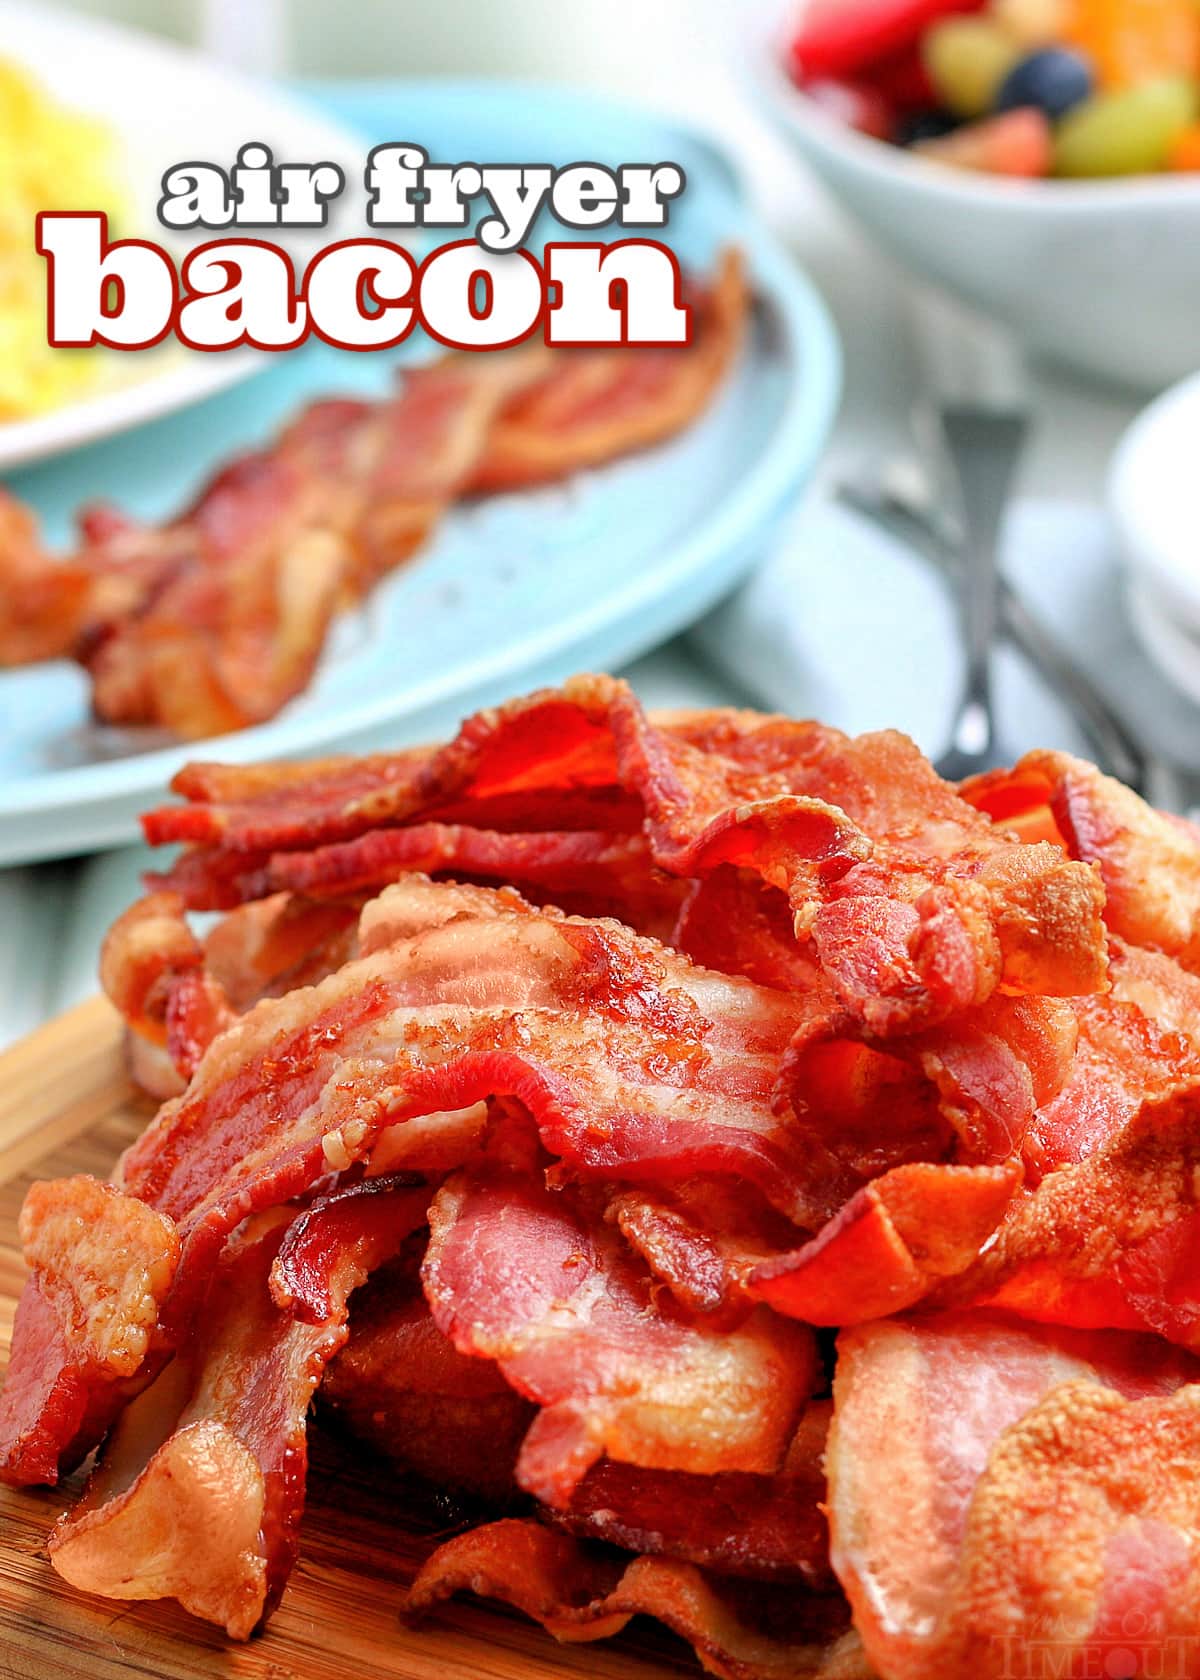 air fryer bacon piled high on wood board with blue blue plate in background with eggs and bacon on it and bowl of fruit and text overlay up top